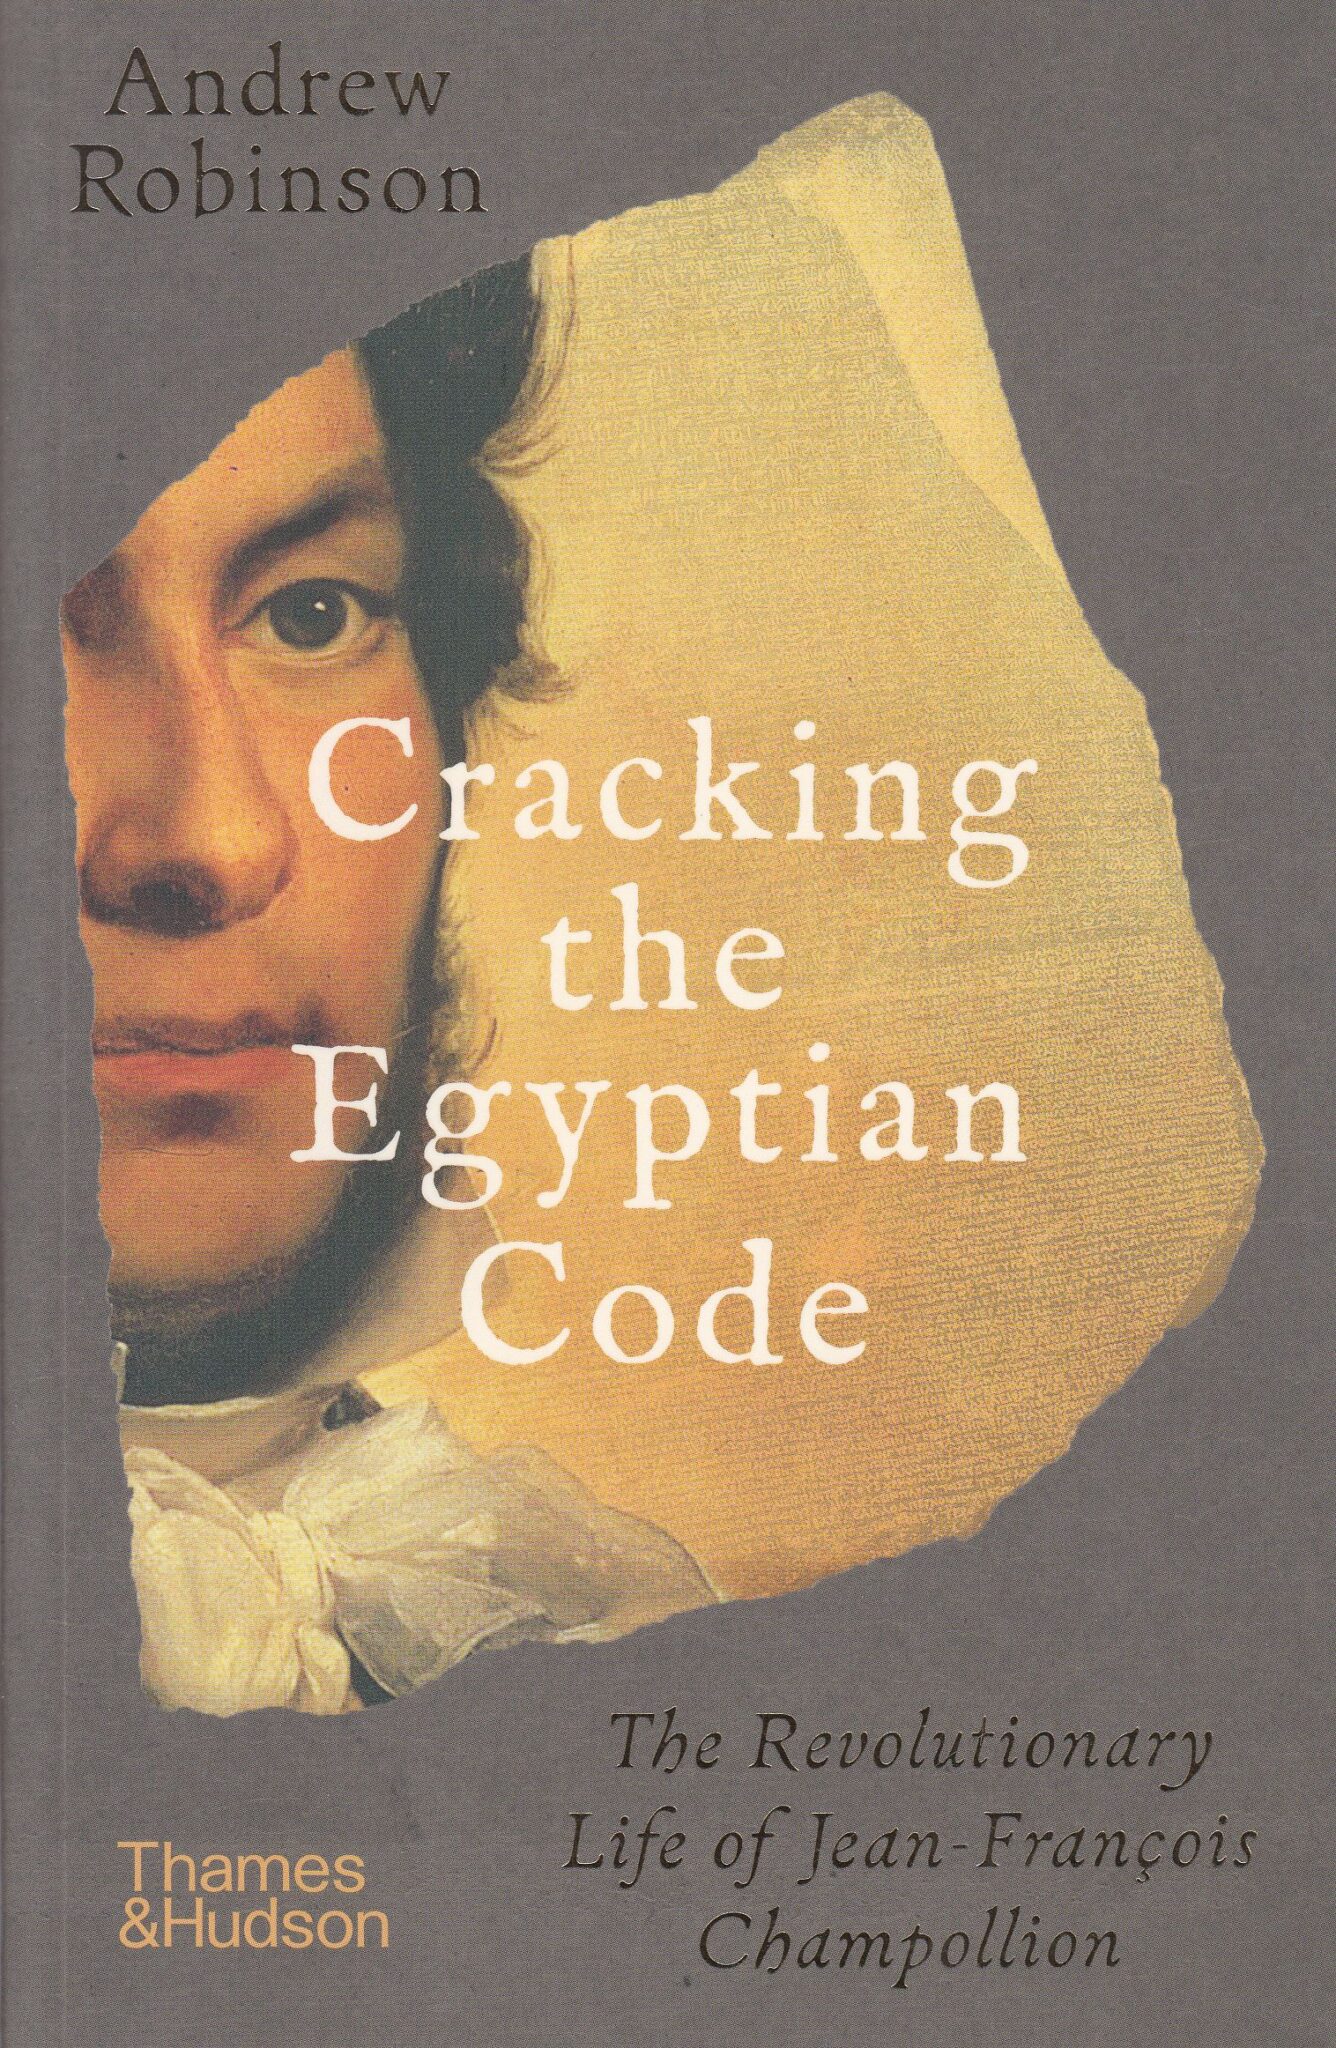 Cracking the Egyptian Codeimage